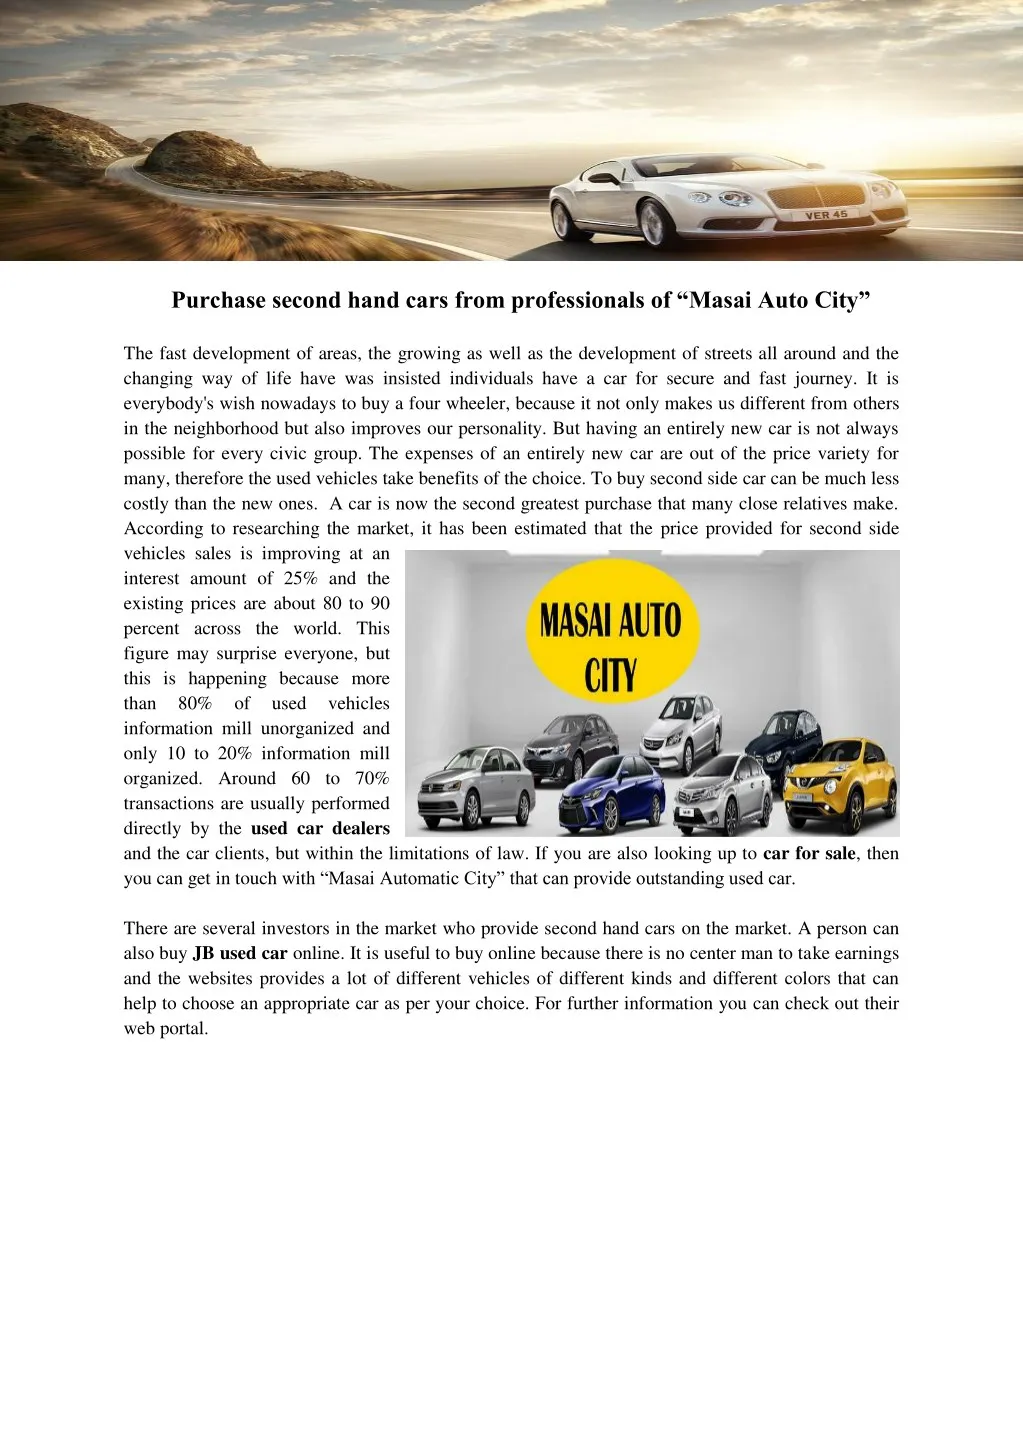 purchase second hand cars from professionals